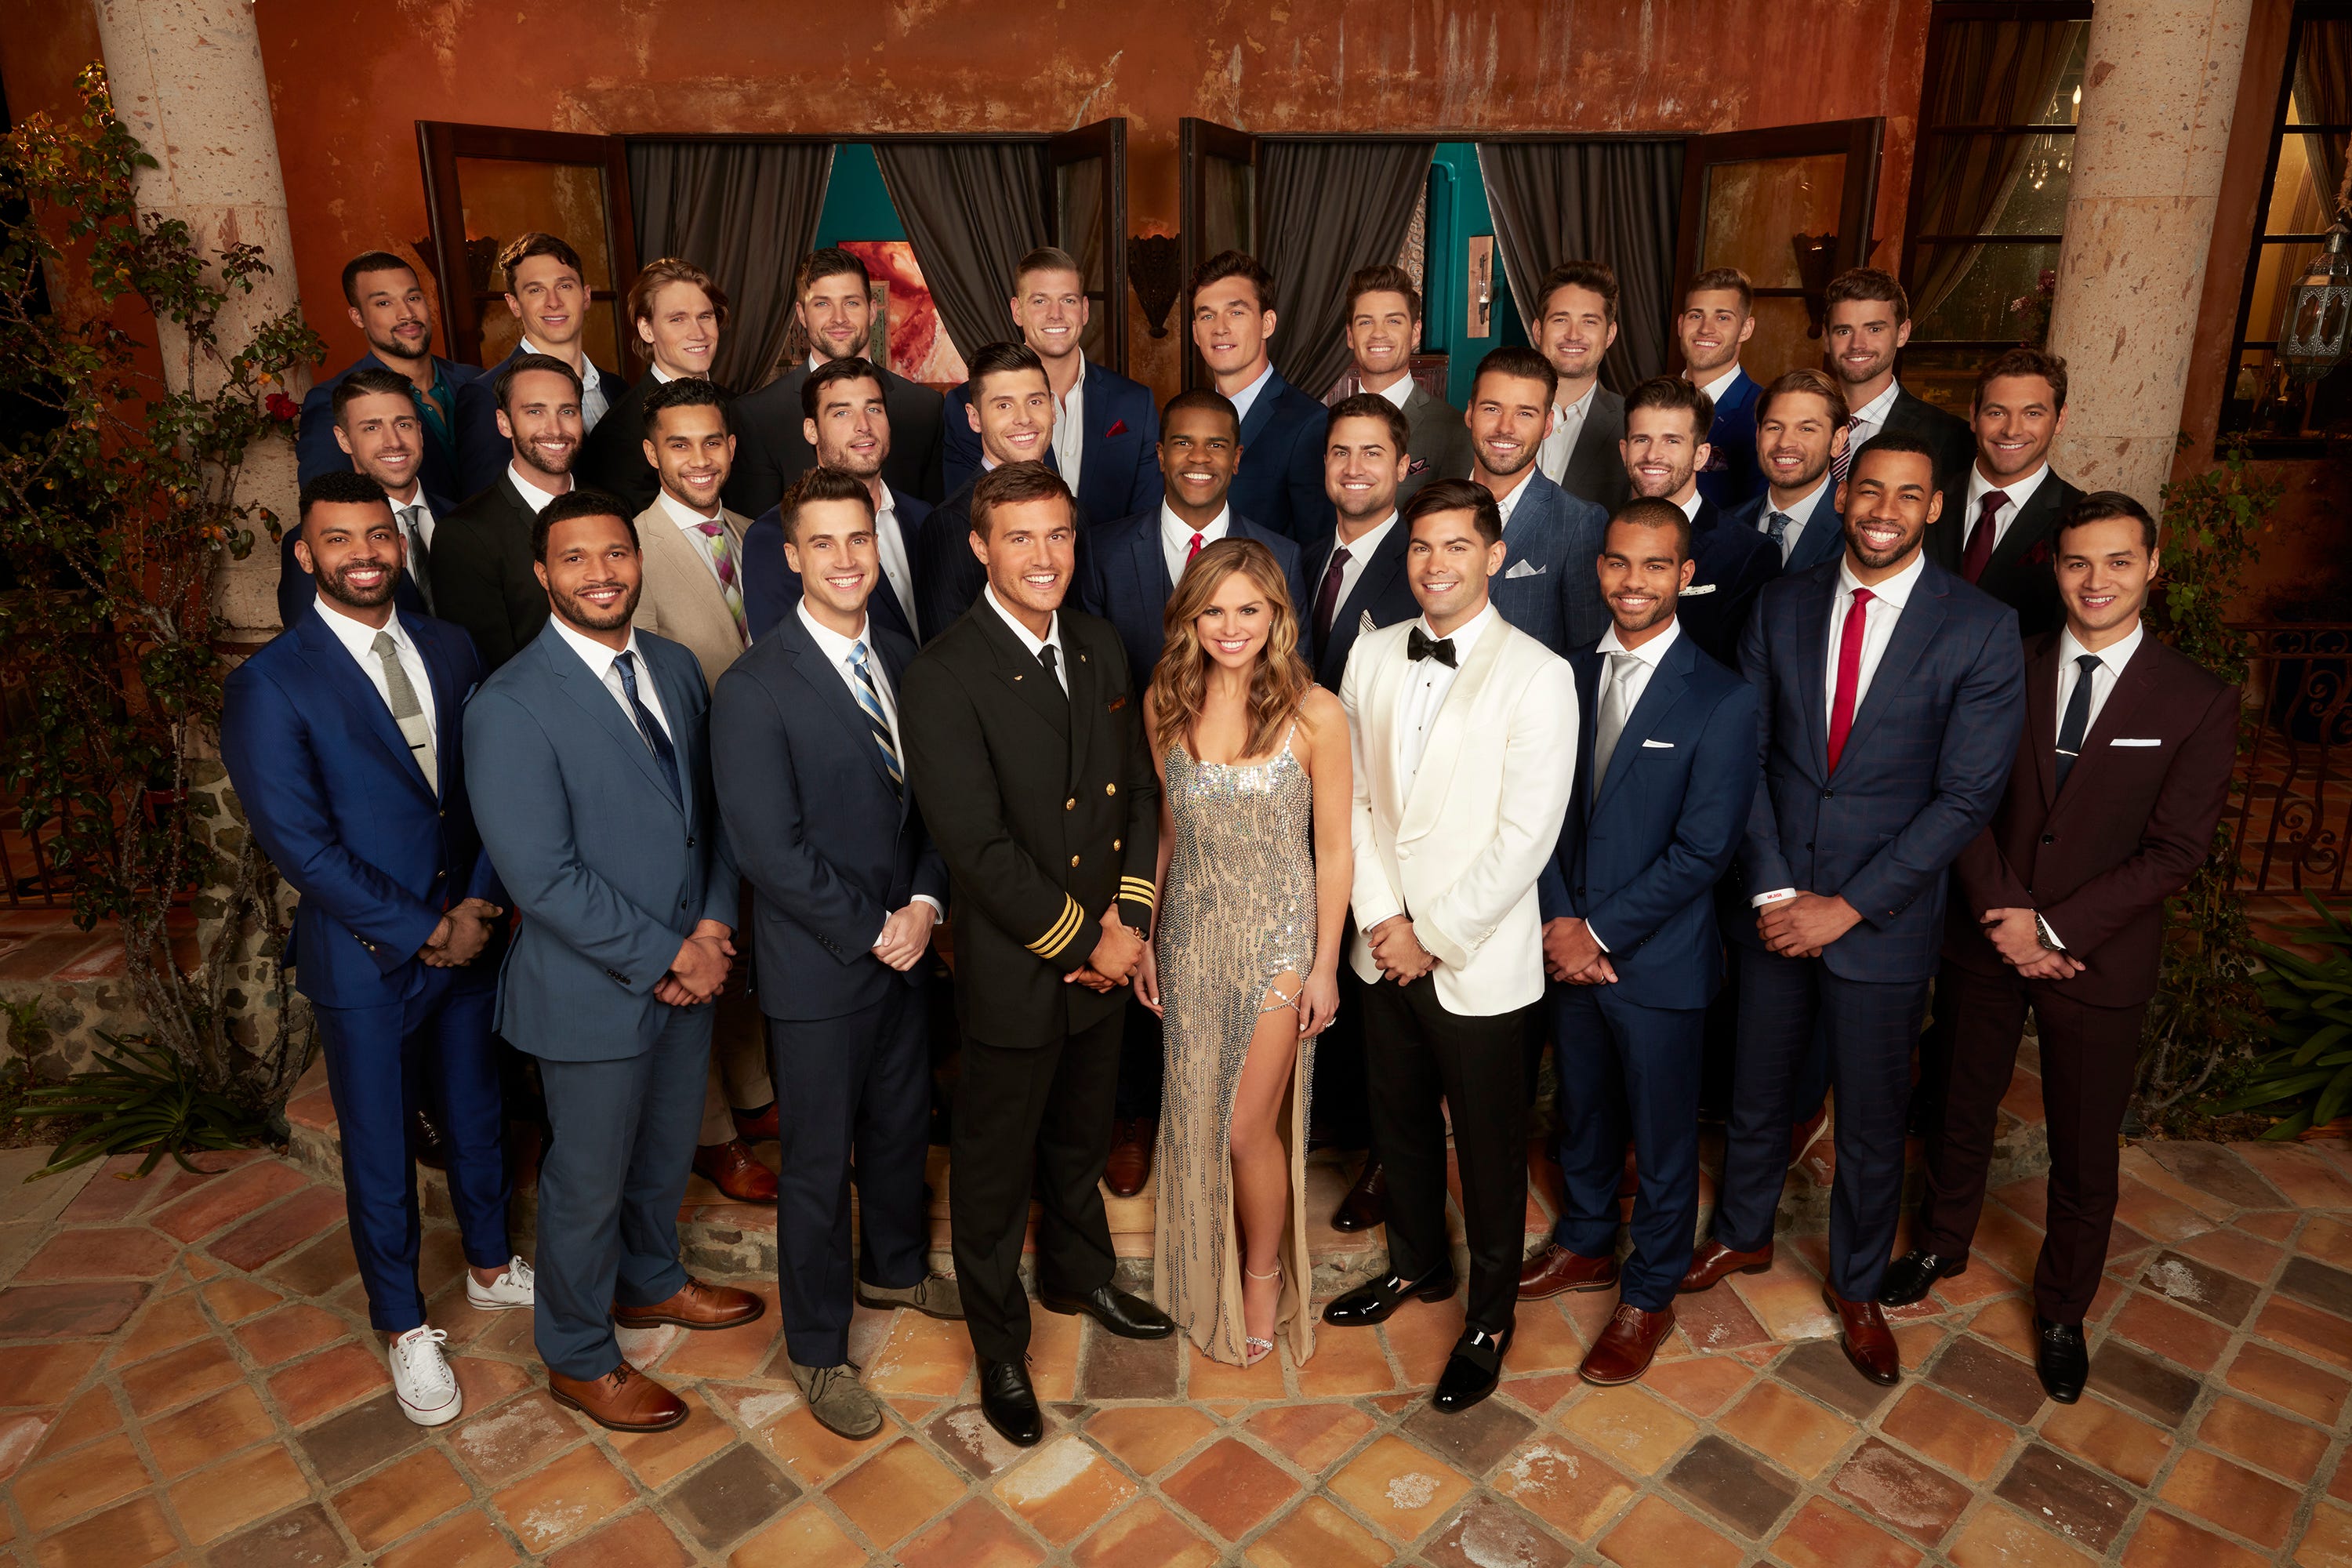 'The Bachelorette' Why Jed Wyatt could get the final rose